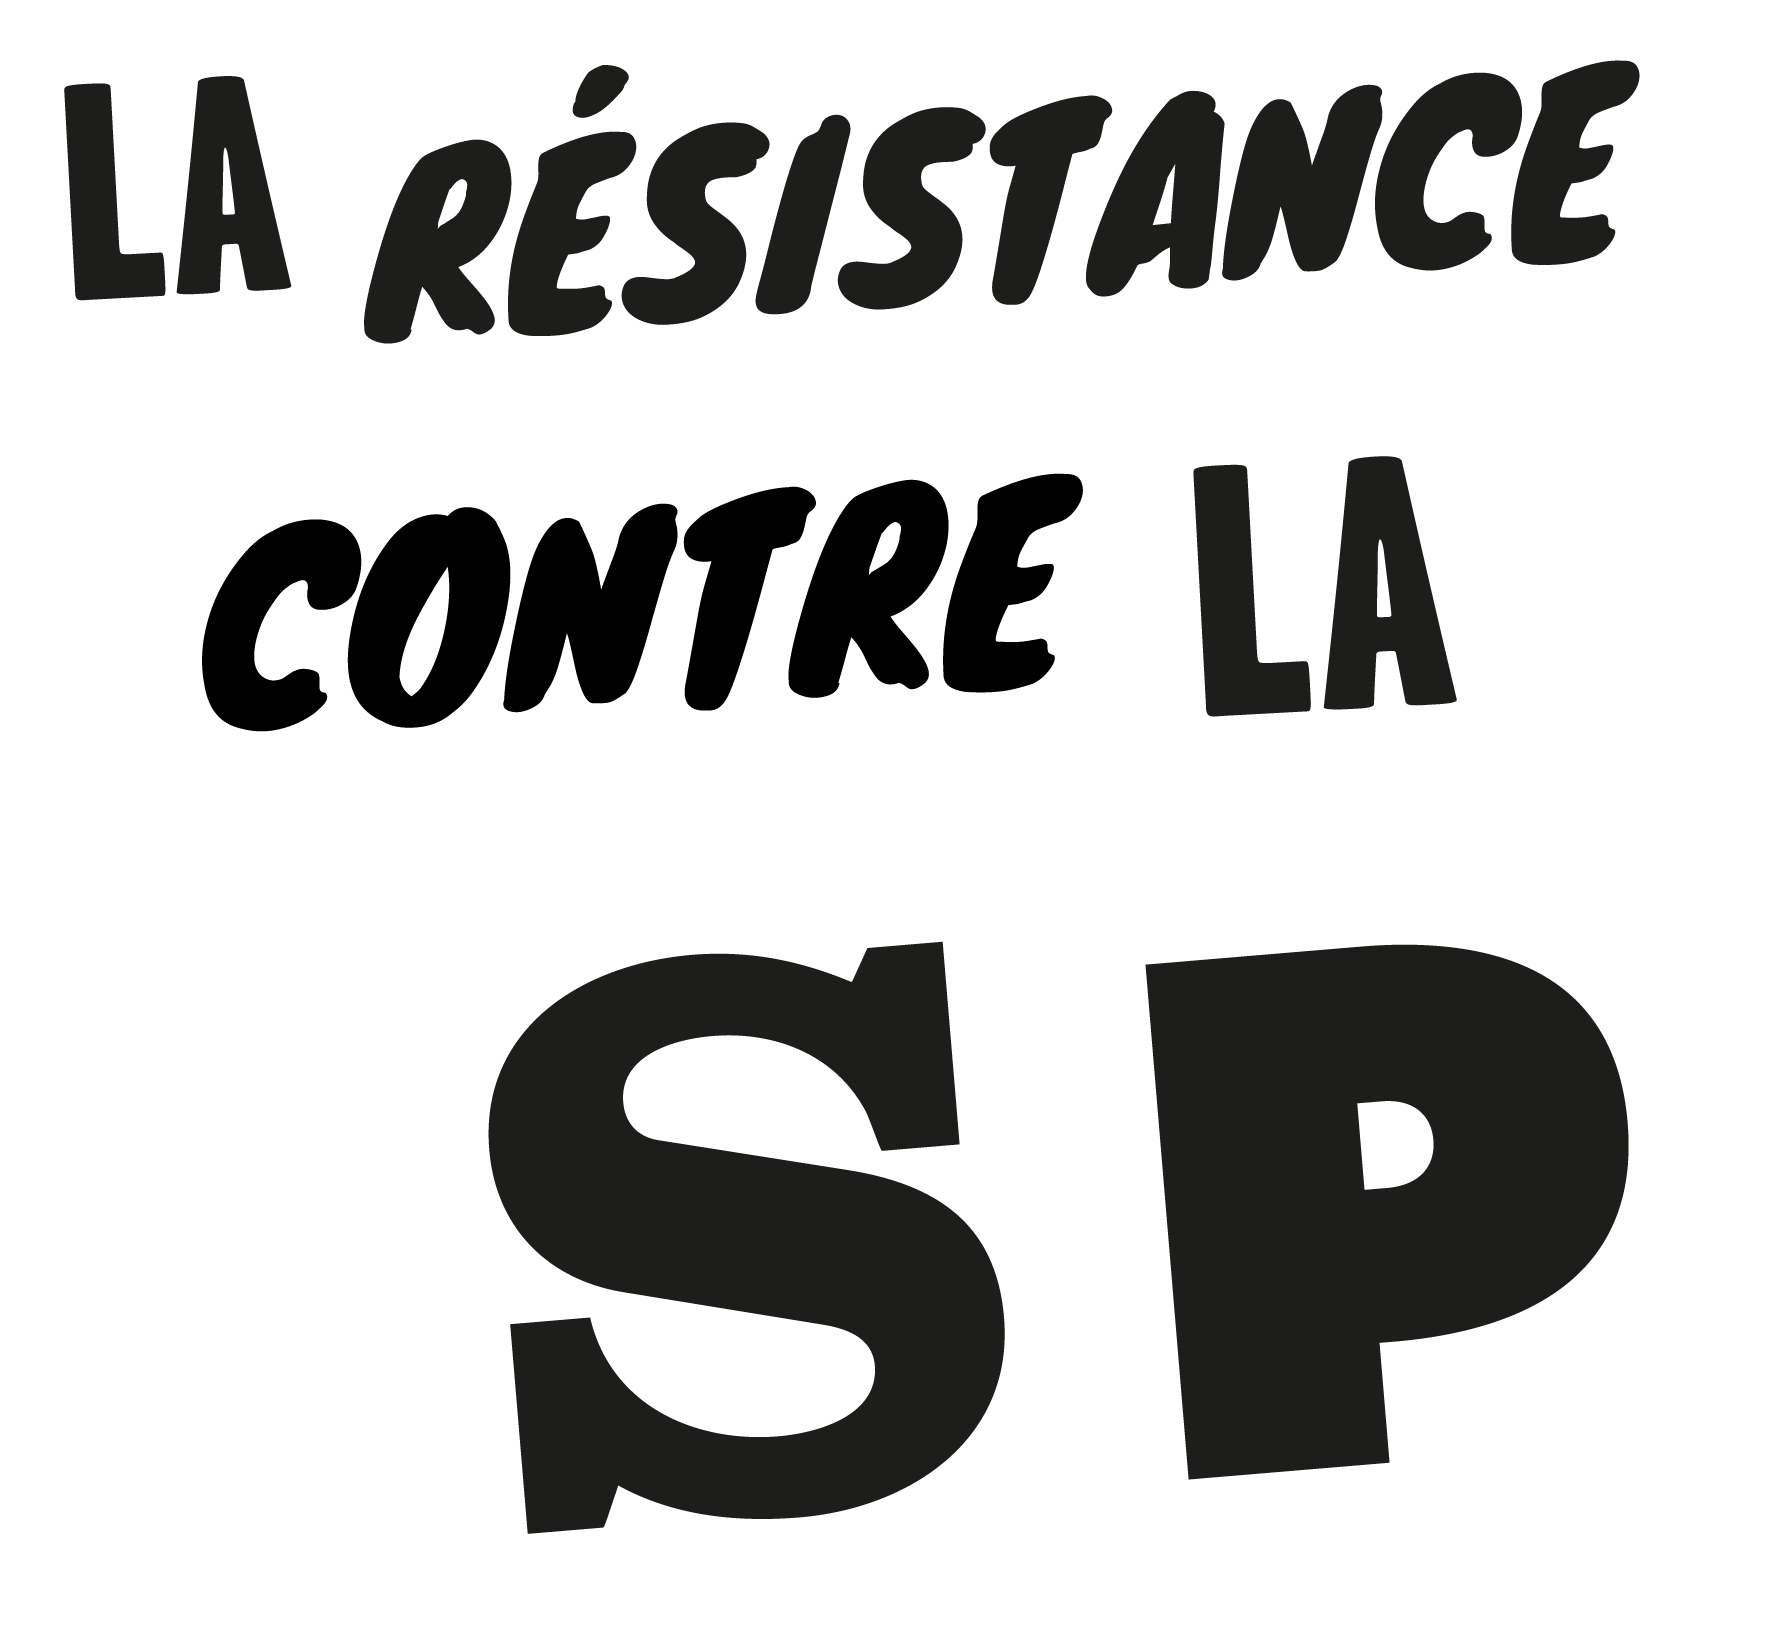 The MS Resistance logo